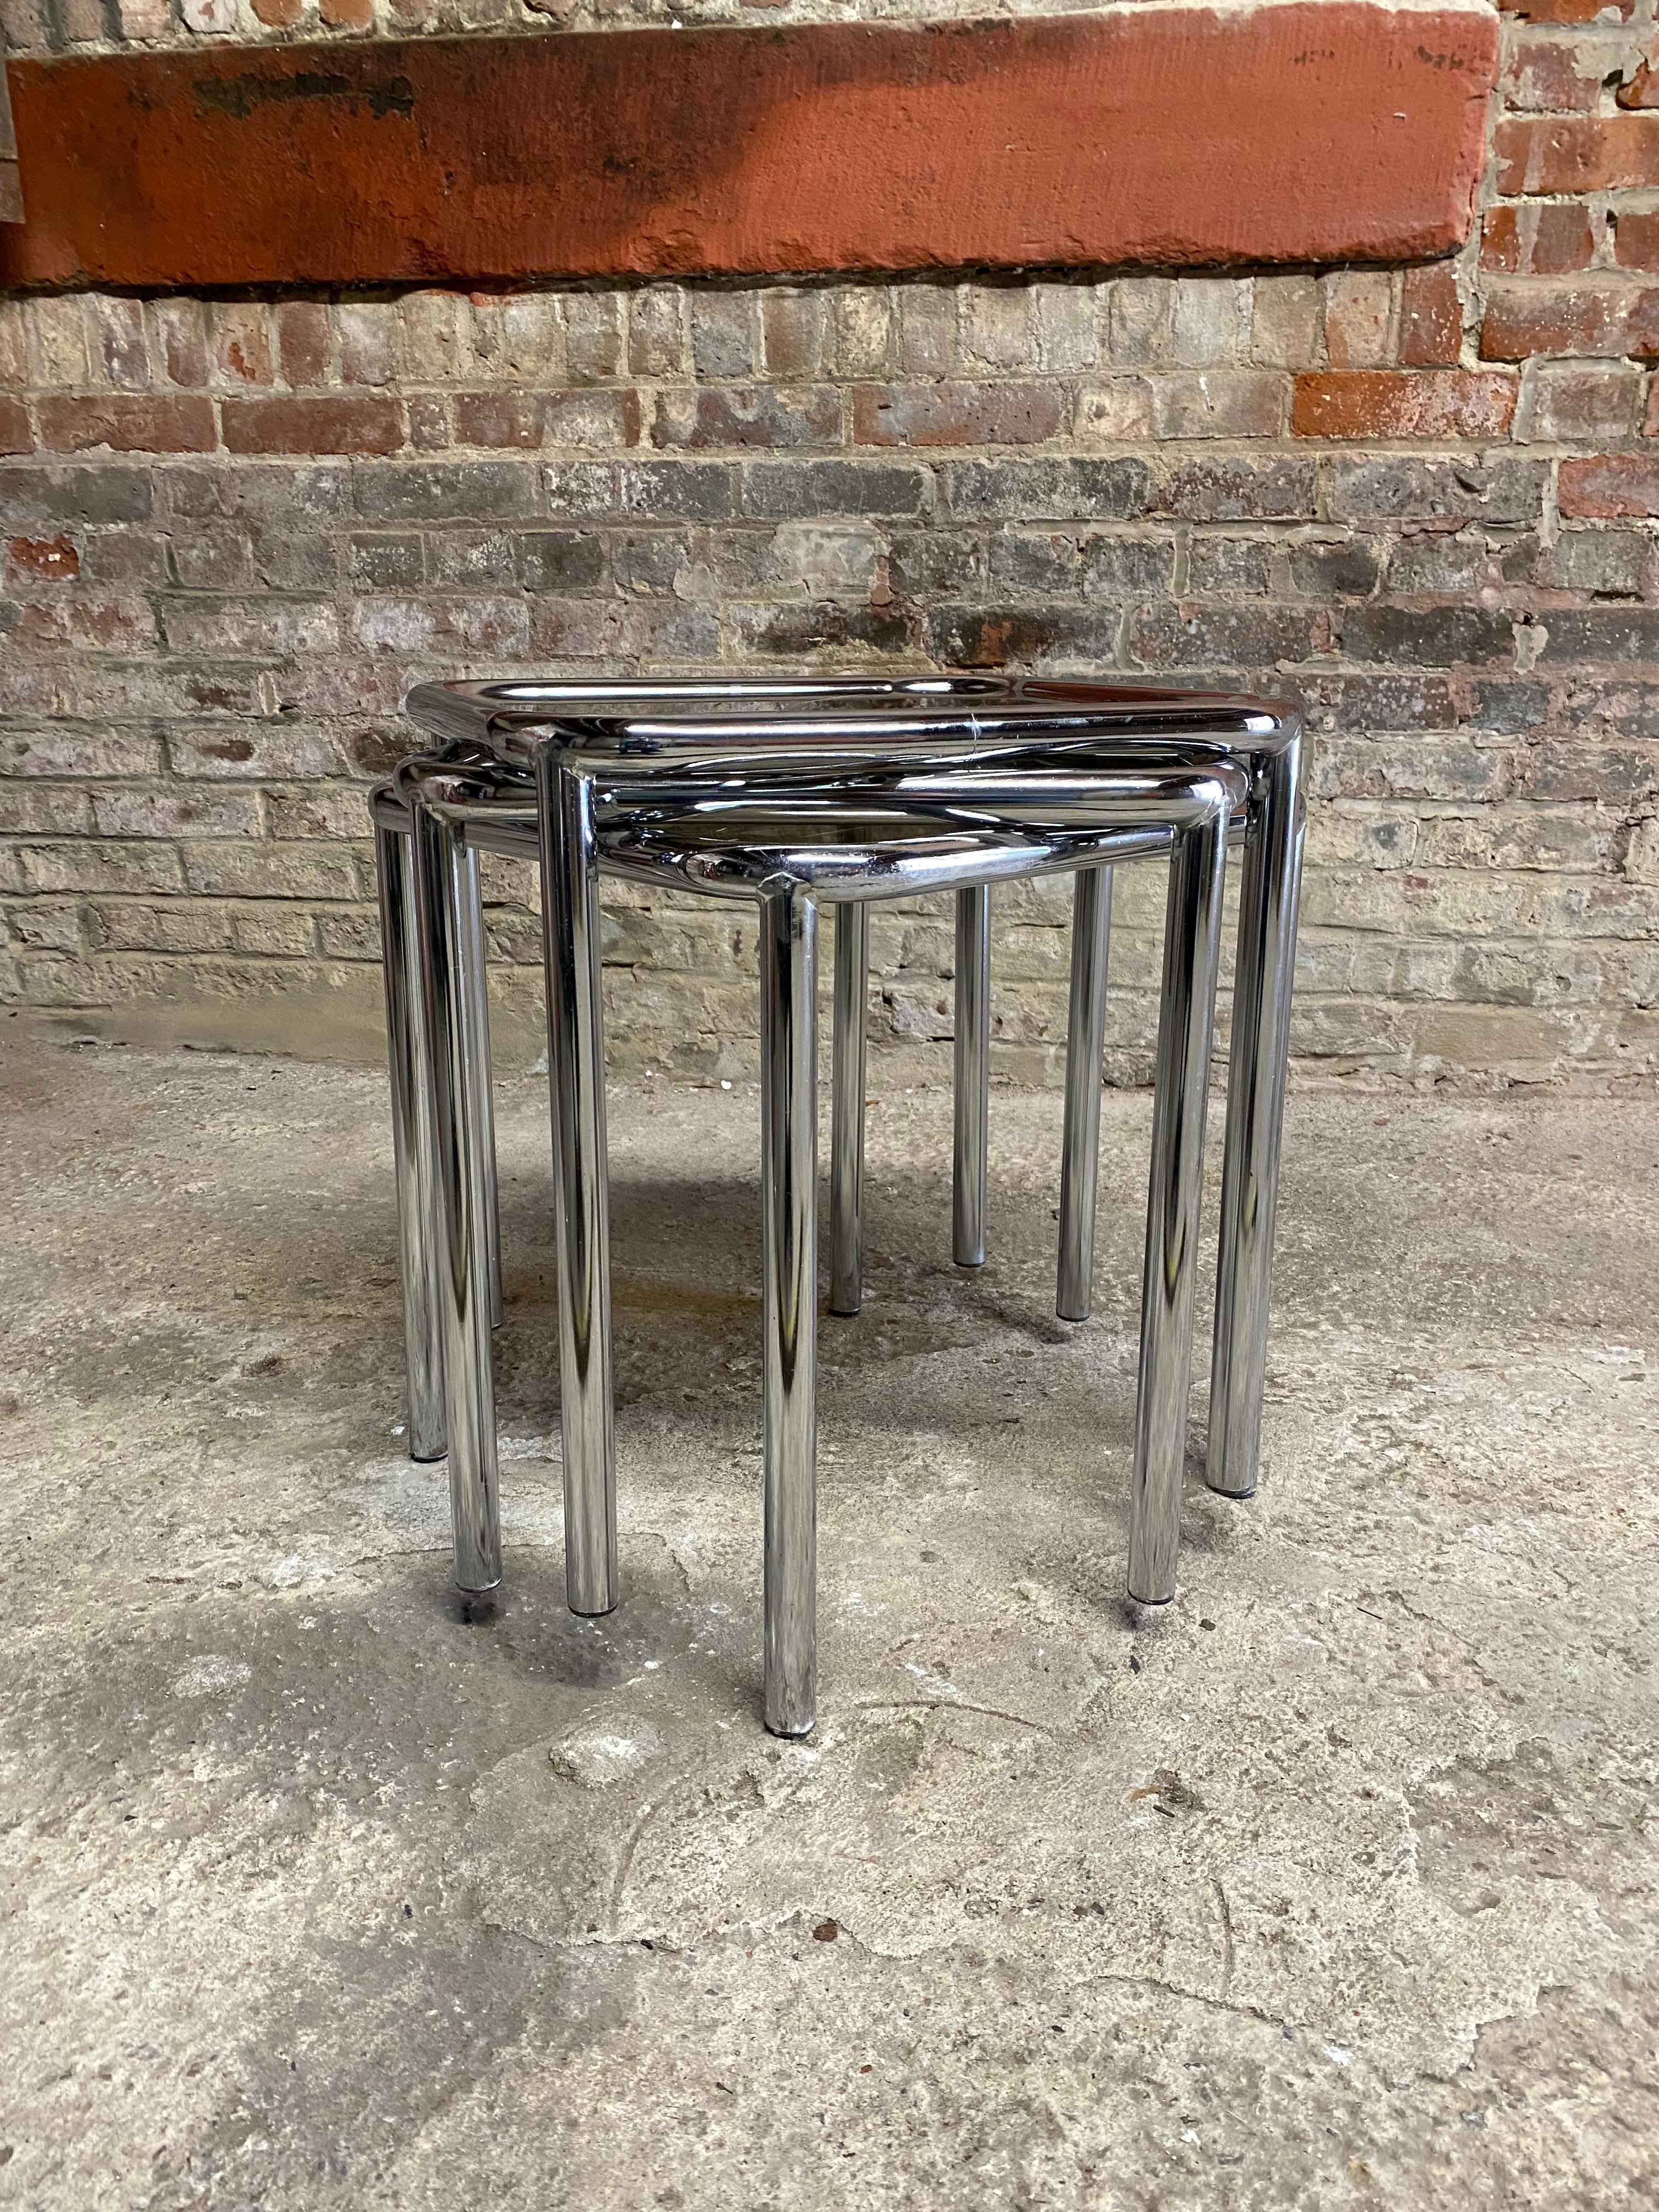 Steel Chrome and Glass Nesting Tables by Arthur Umanoff for The Ansley Collection